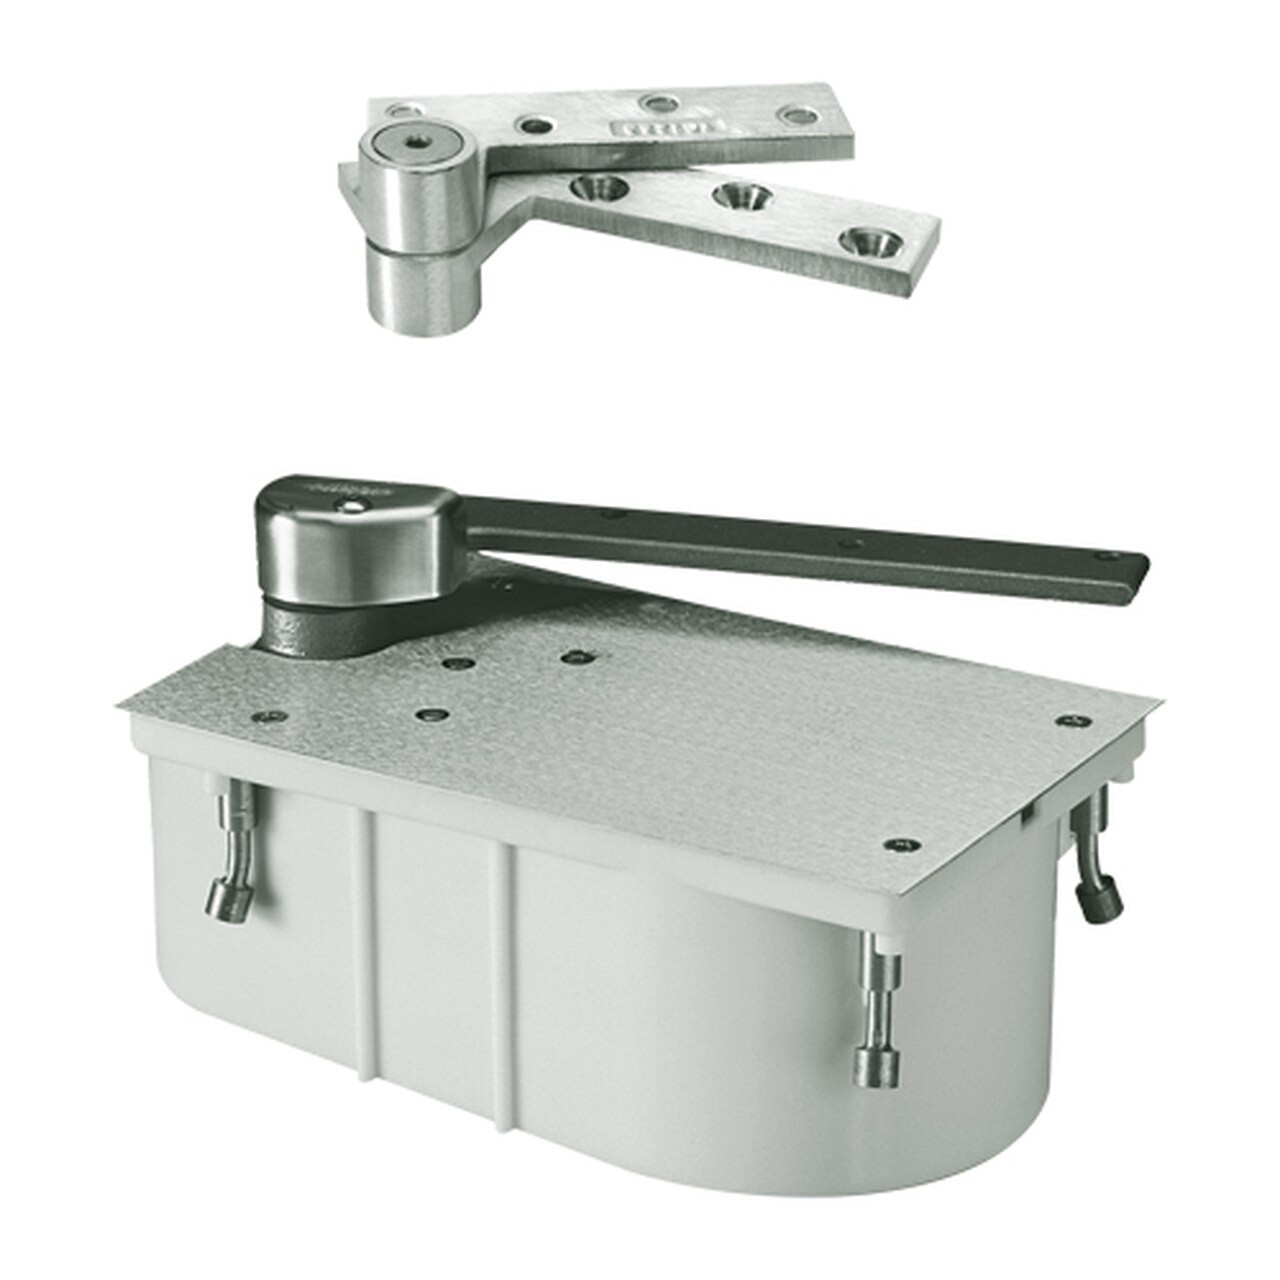 F27-95N-LTP-LH-619 Rixson 27 Series Fire Rated Heavy Duty 3/4" Offset Hung Floor Closer in Satin Nickel Finish